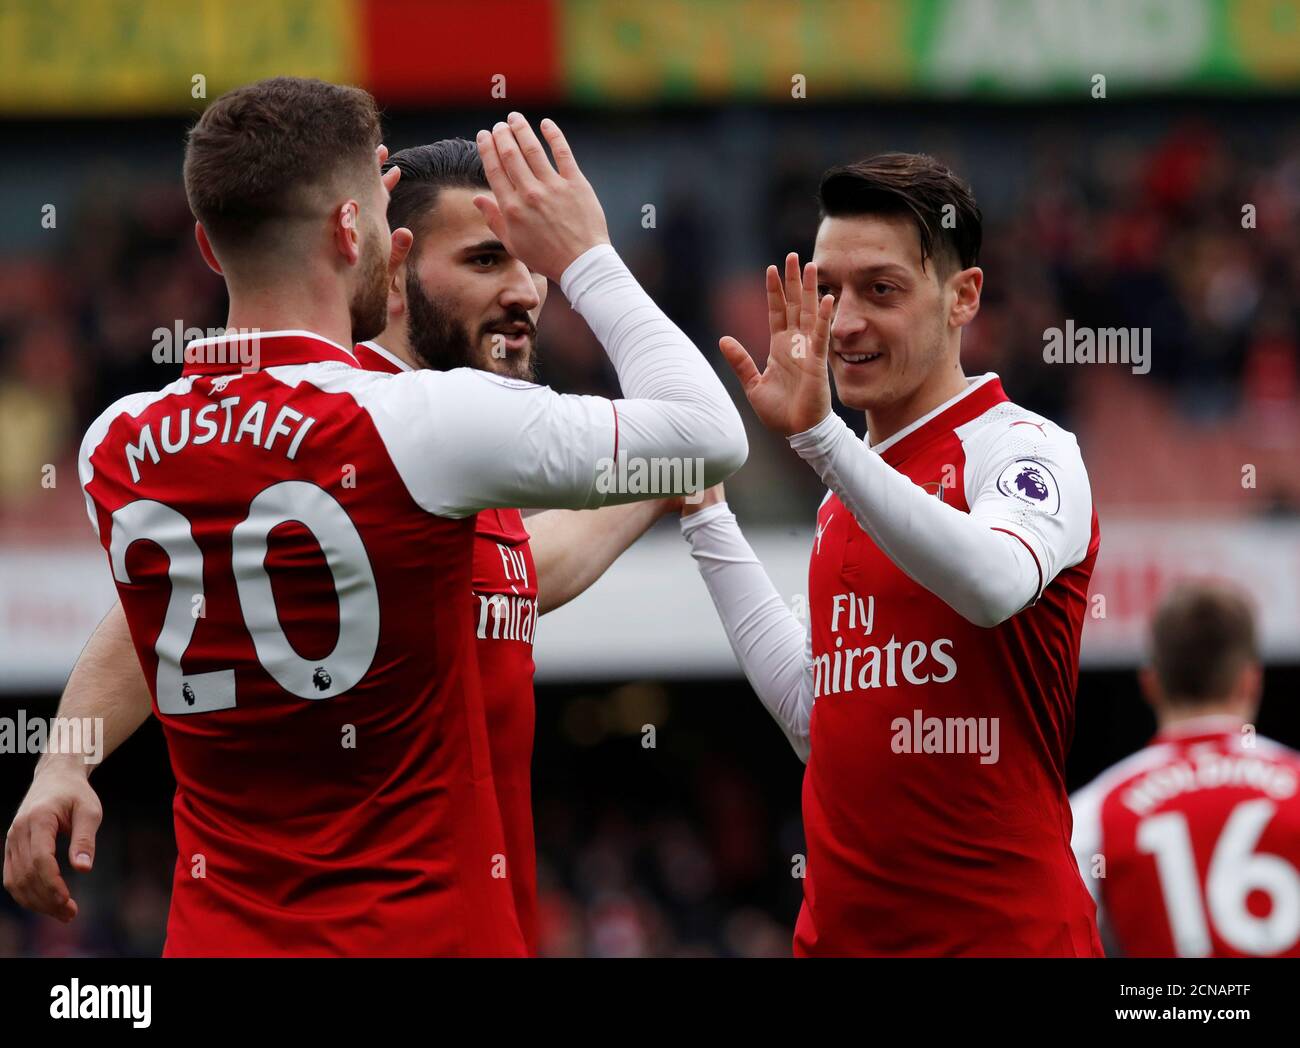 Soccer Football - Premier League - Arsenal vs Watford - Emirates Stadium, London, Britain - March 11, 2018   Arsenal's Shkodran Mustafi celebrates scoring their first goal with team mates         REUTERS/Eddie Keogh    EDITORIAL USE ONLY. No use with unauthorized audio, video, data, fixture lists, club/league logos or 'live' services. Online in-match use limited to 75 images, no video emulation. No use in betting, games or single club/league/player publications.  Please contact your account representative for further details. Stock Photo